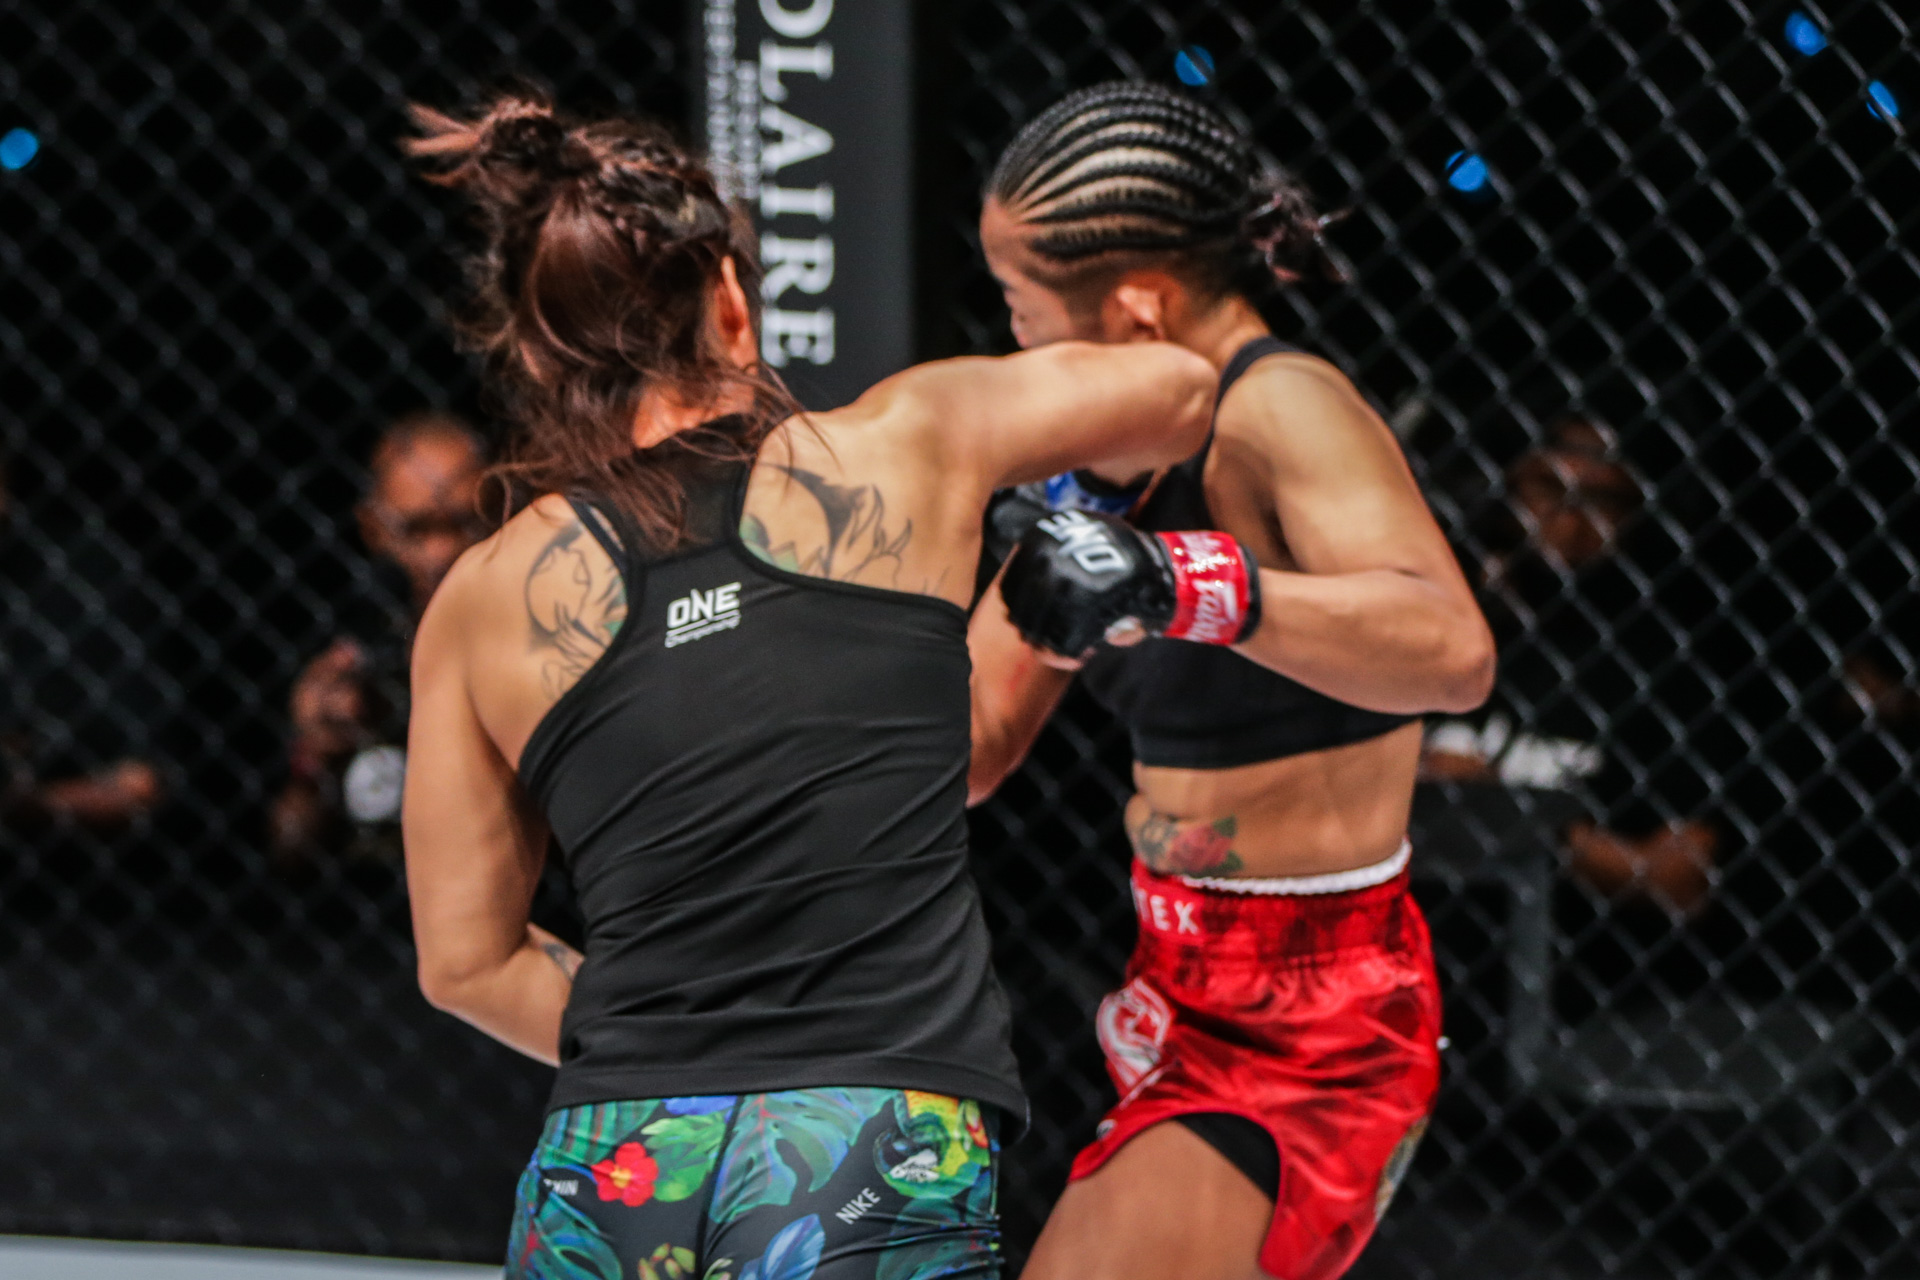 ONE-164-Jenelyn-Olsim ONE 164: Jhanlo Sangiao delivers Team Lakay’s first win; Jenelyn Olsim falters Mixed Martial Arts News ONE Championship  - philippine sports news